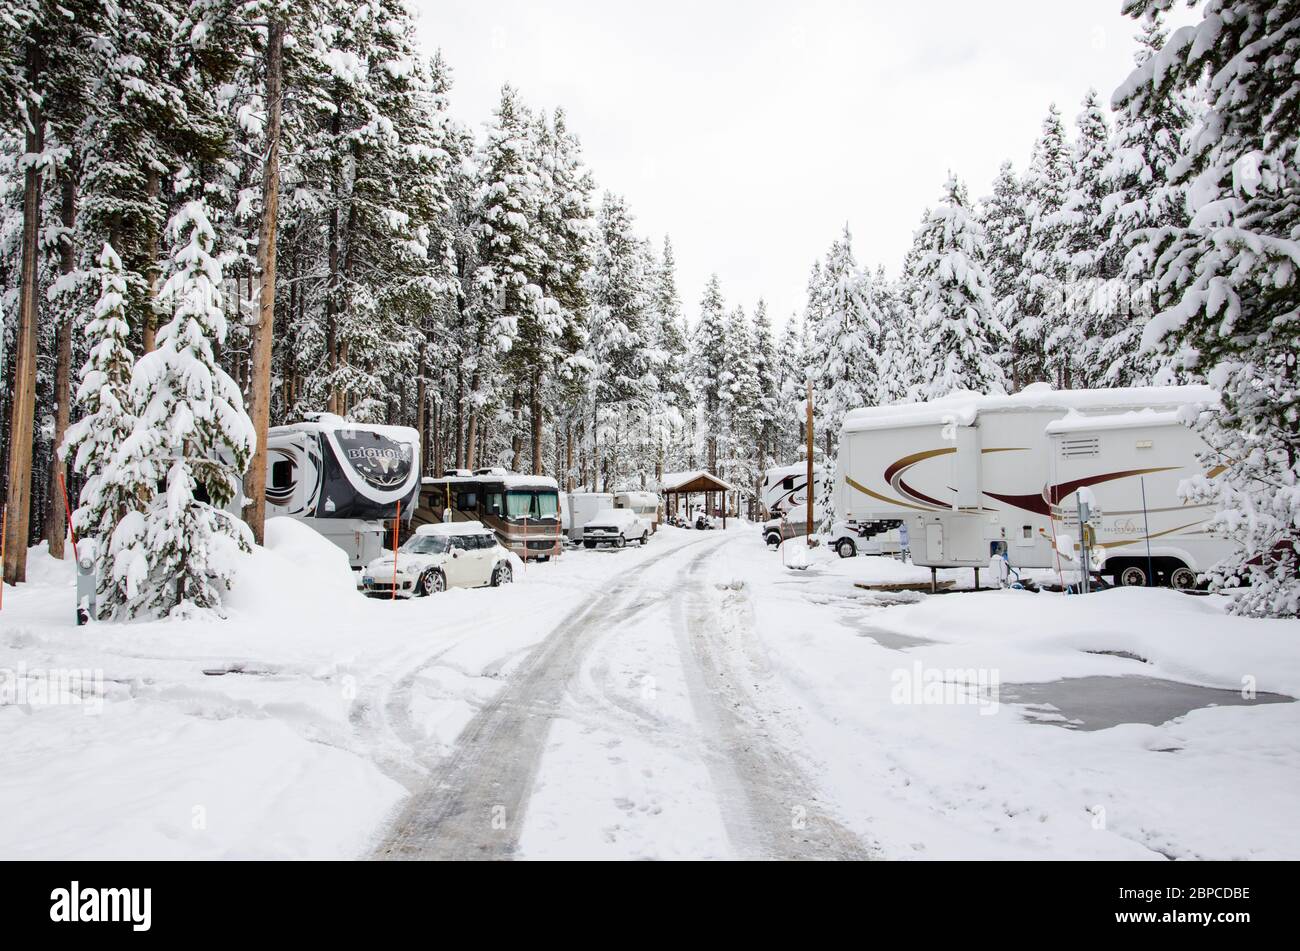 A mid May snowfall covers employee RV's in Yellowstone National Park, USA Stock Photo